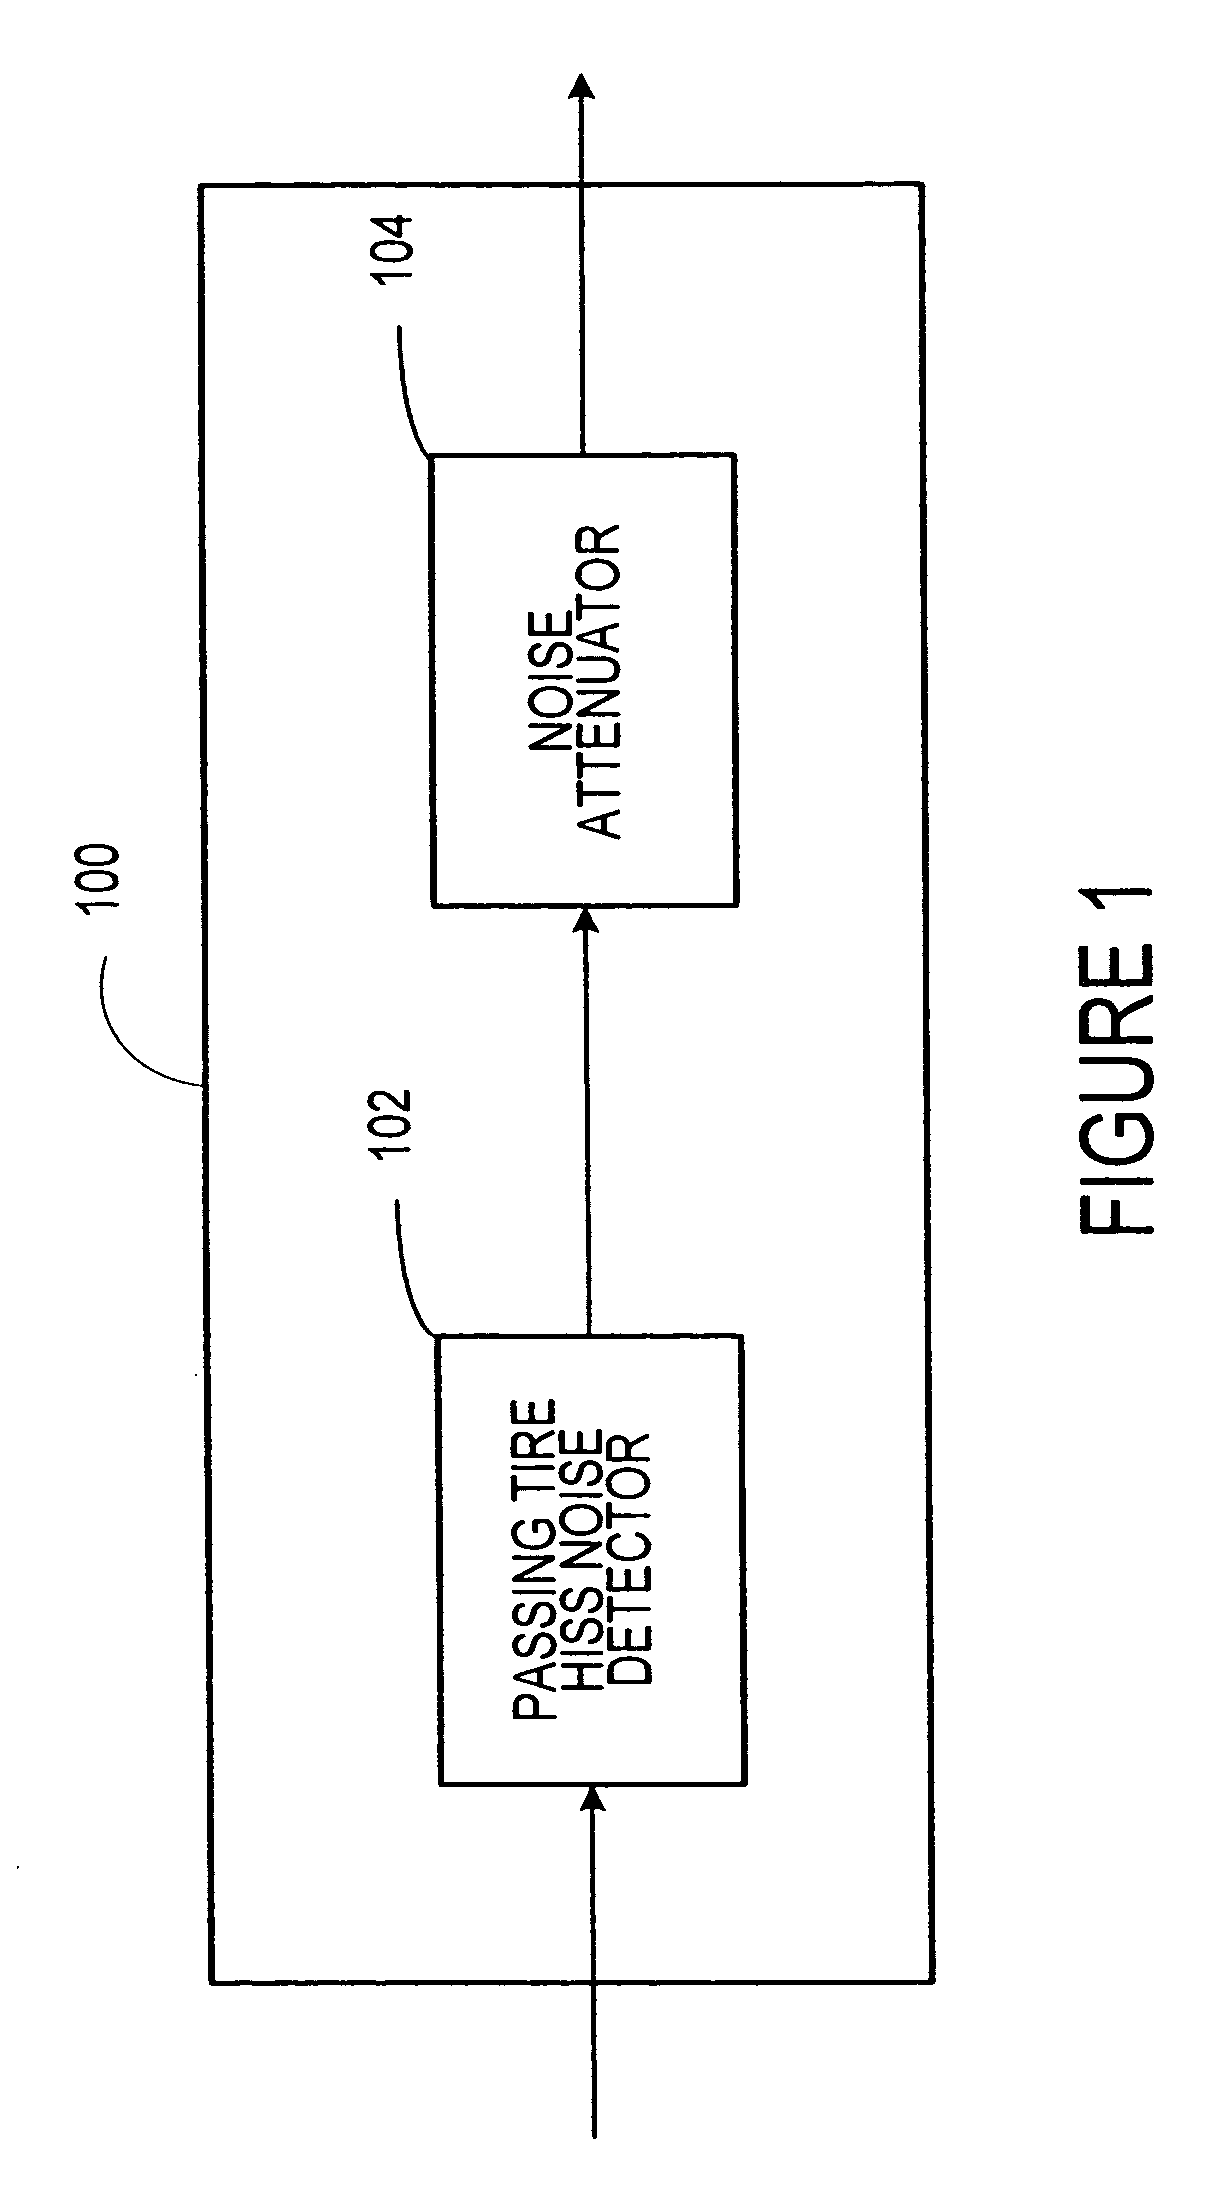 System for suppressing passing tire hiss